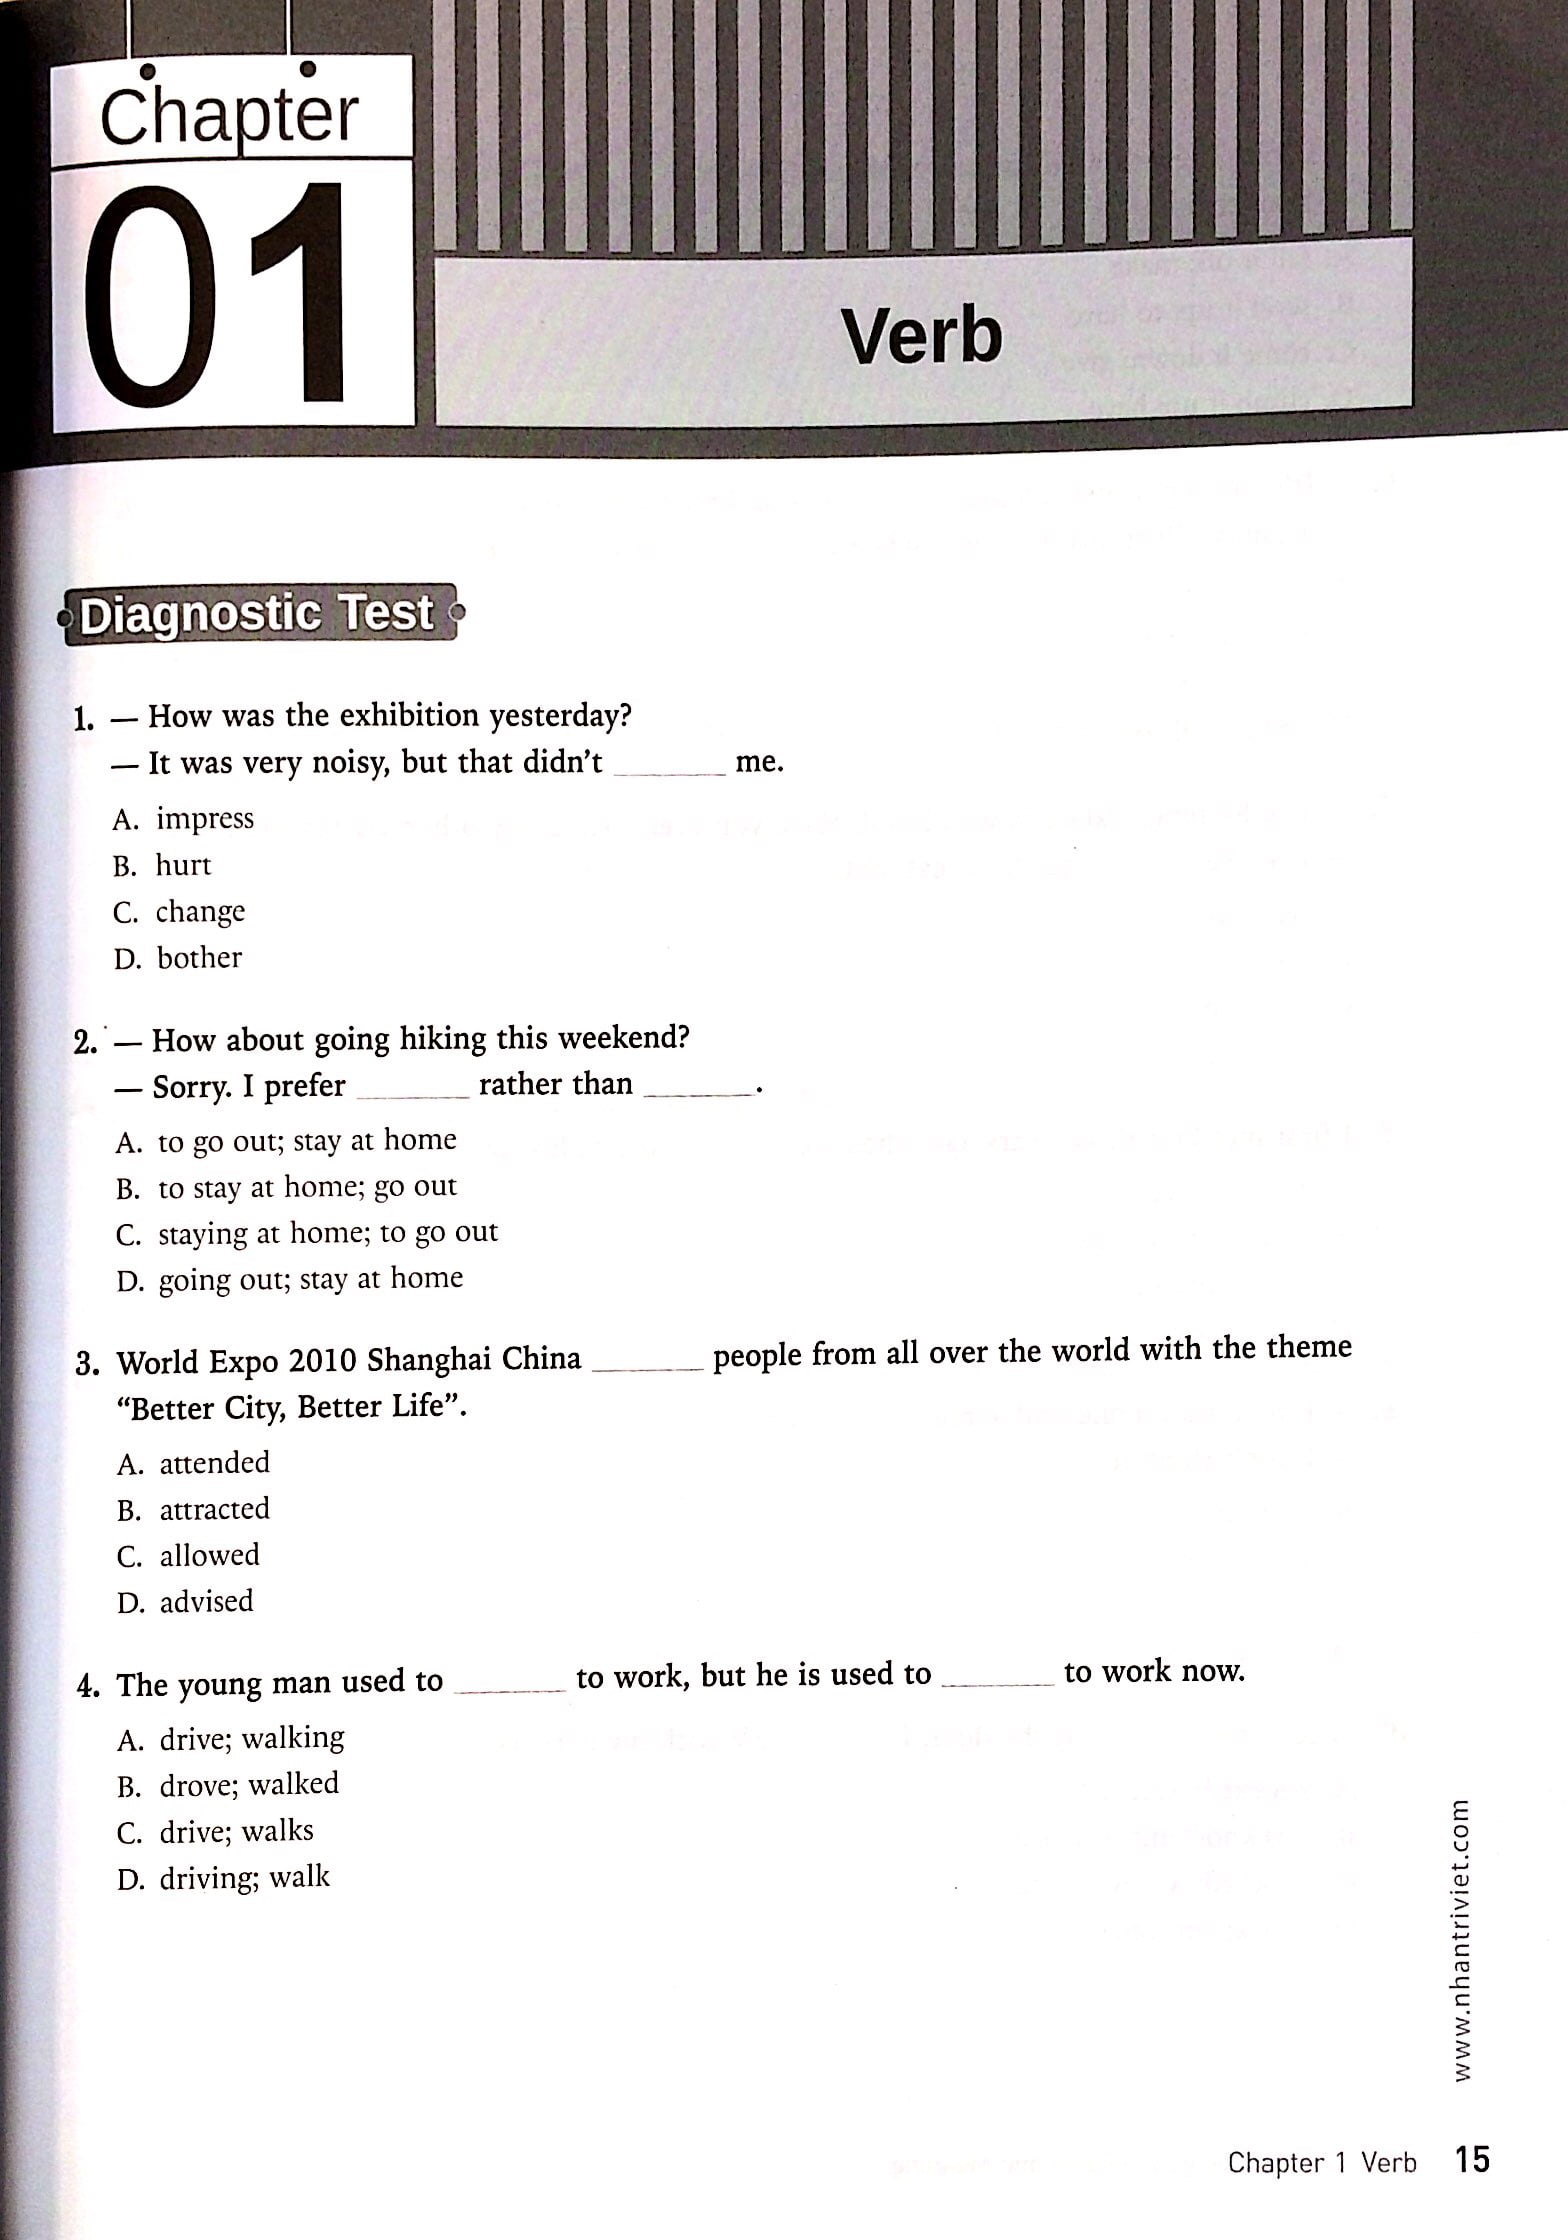 Toefl Junior Language Form And Meaning PDF